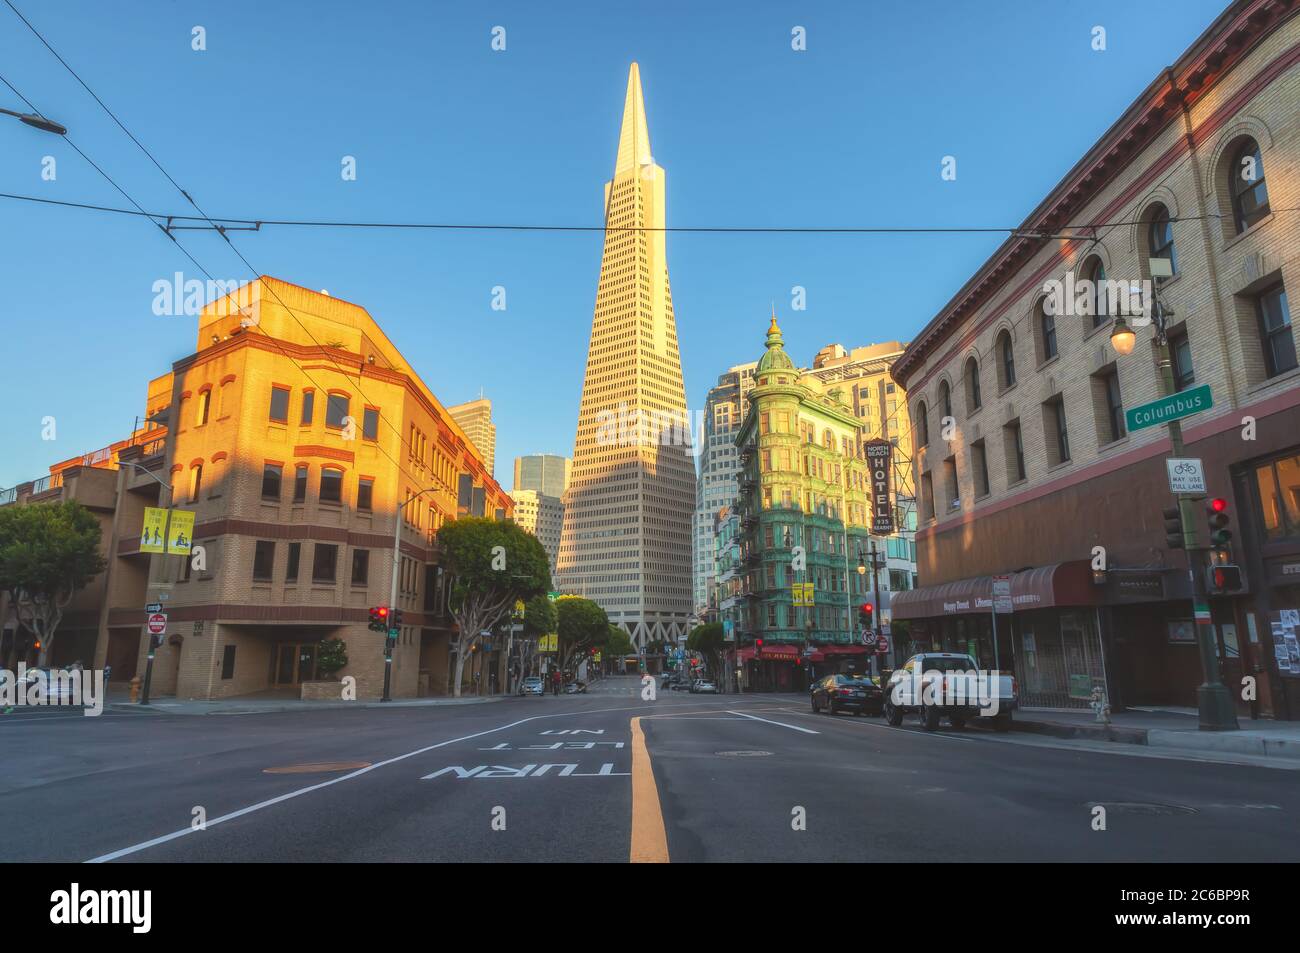 View of the iconic TransAmerica Pyramid from the Columbus Street at North Beach, San Francisco, California, USA. Stock Photo